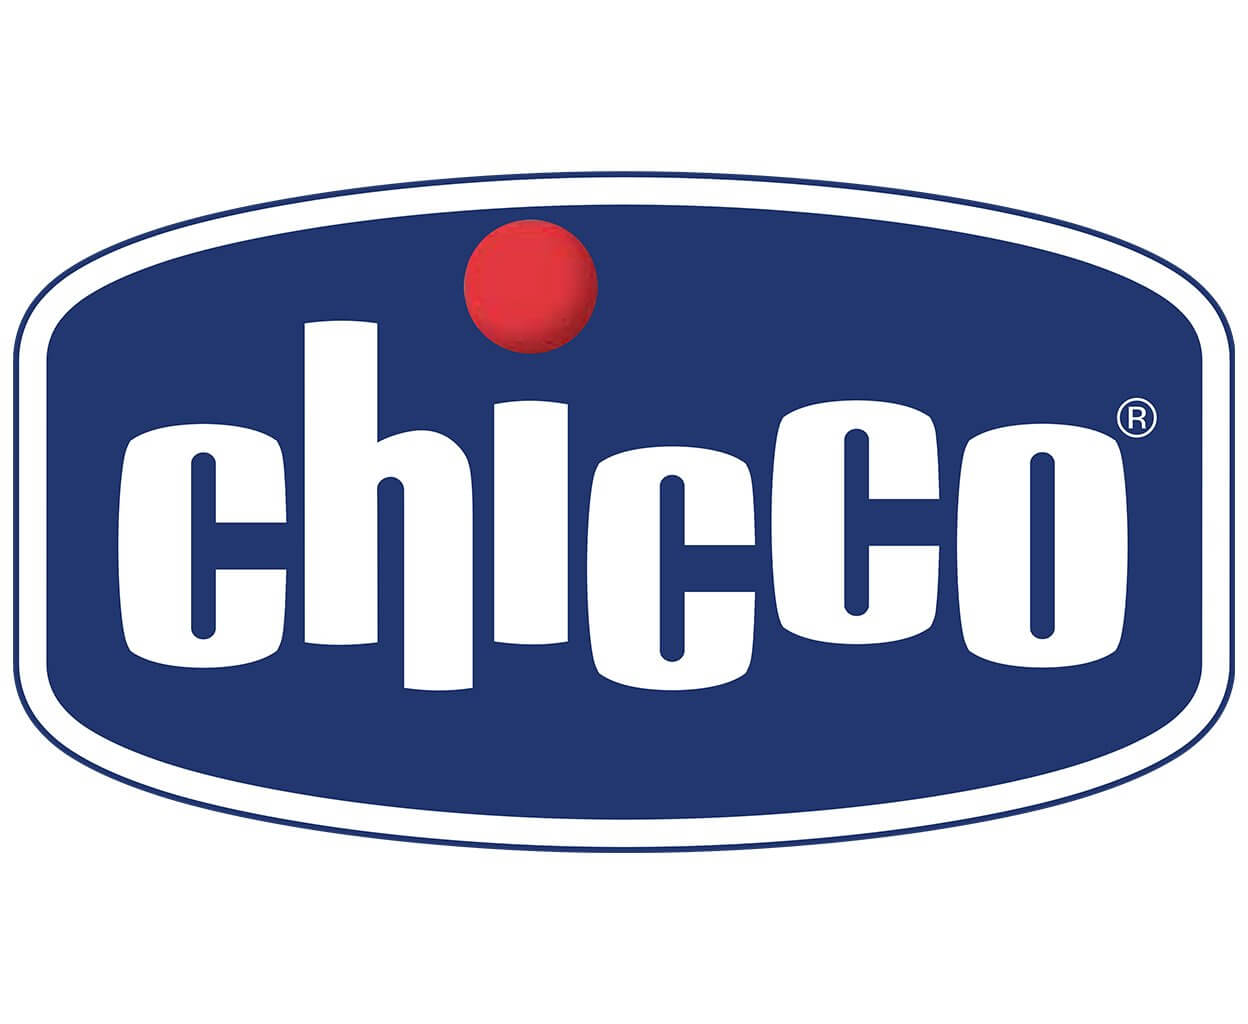 Buy Chicco Baby Product Online in India